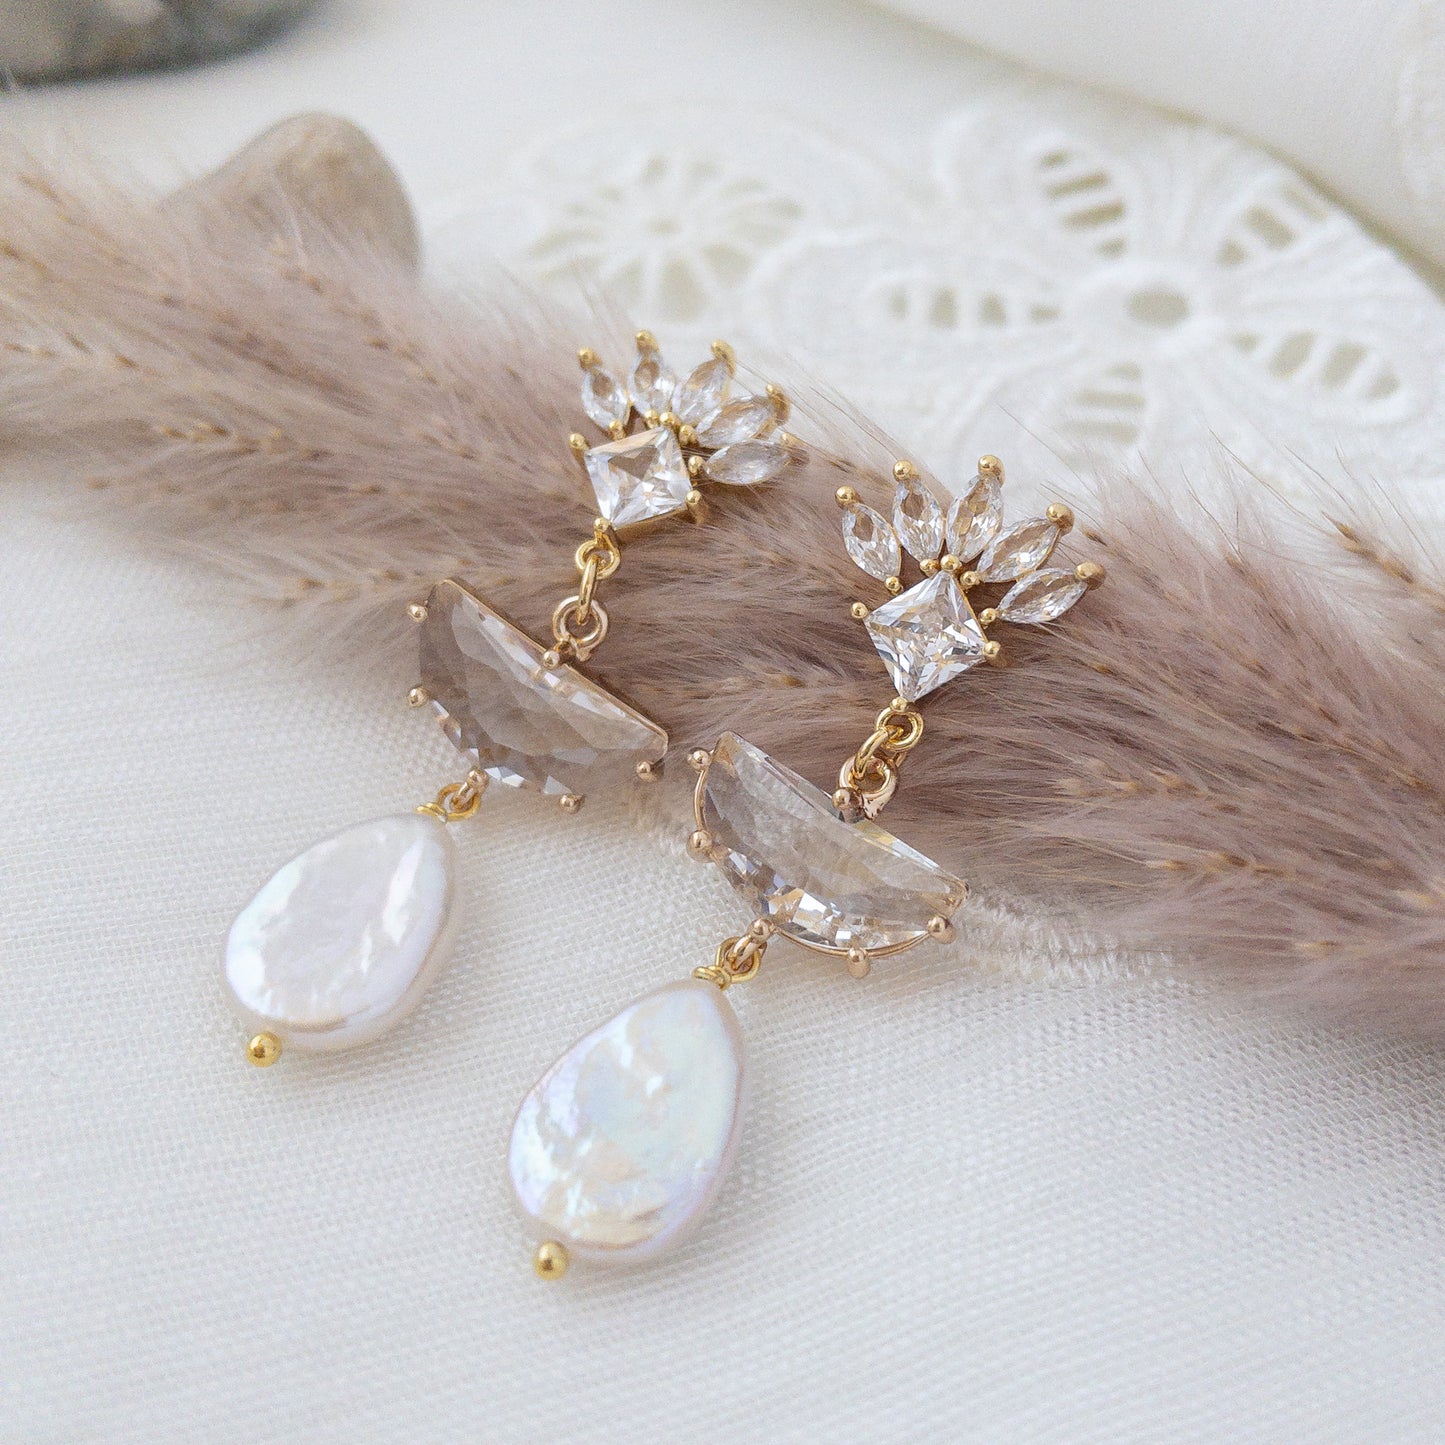 vintage inspired earrings with fan shaped crystals and freshwater pearls by YSM Designs